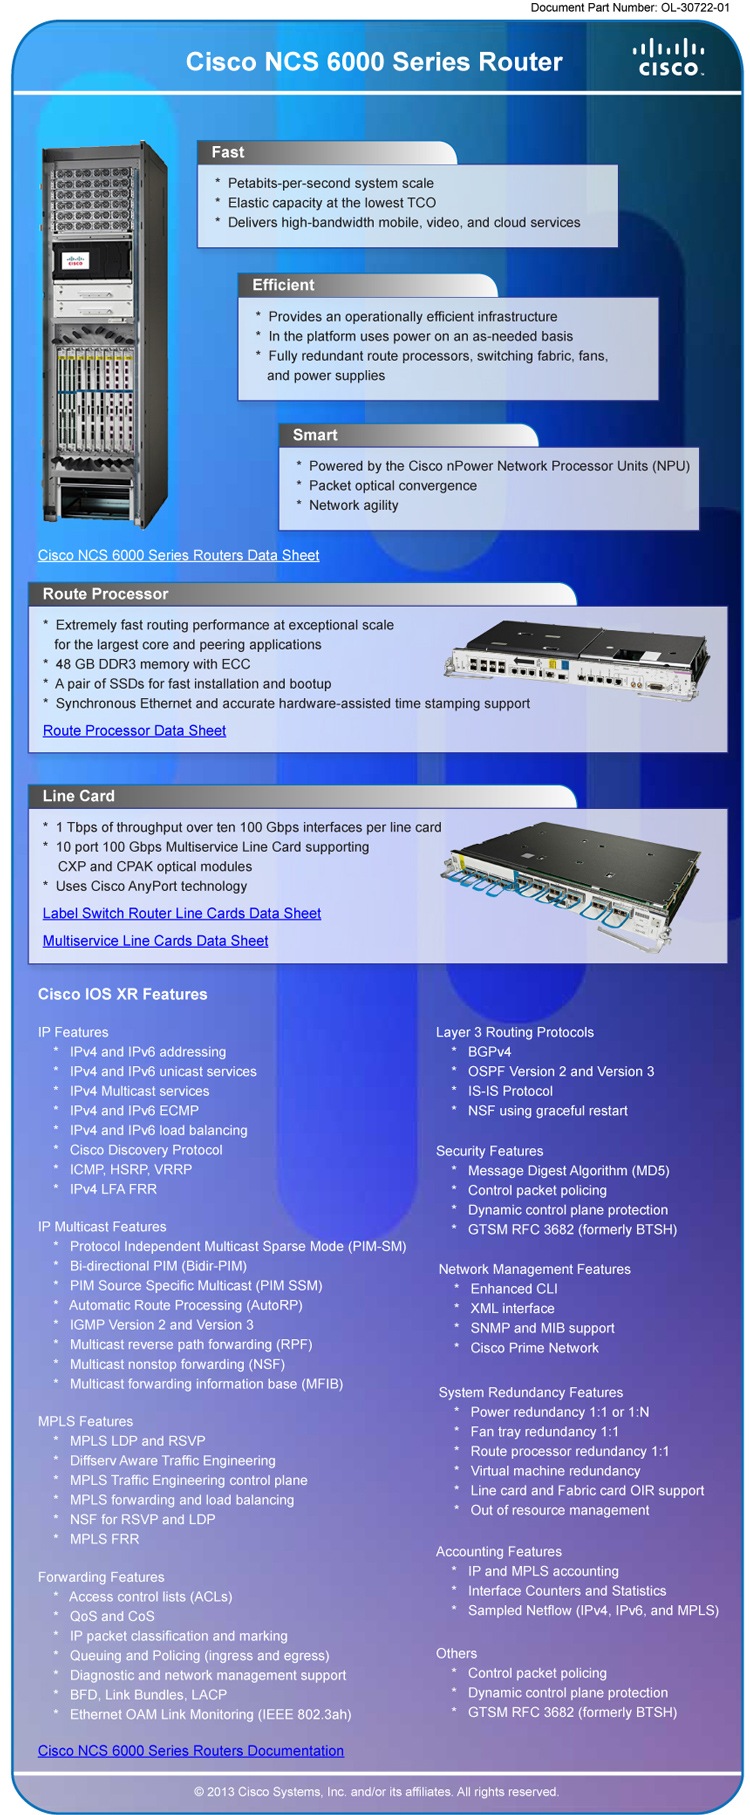 Cisco NCS 6000 Series Router Key Features [Infographic]